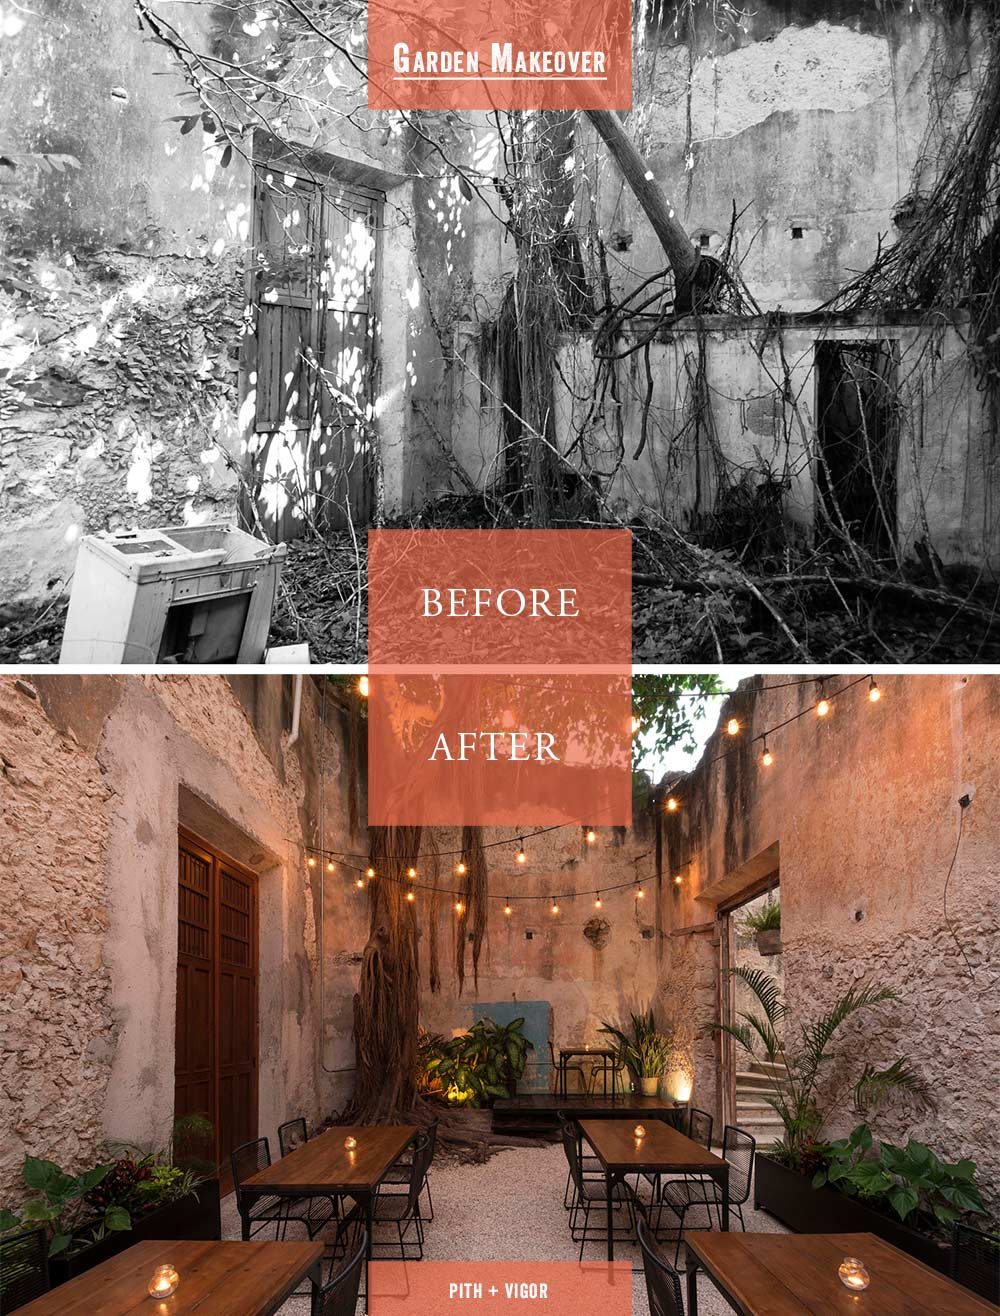 Ruins become a stylish outdoor bar garden and lounge in the Yucatan.